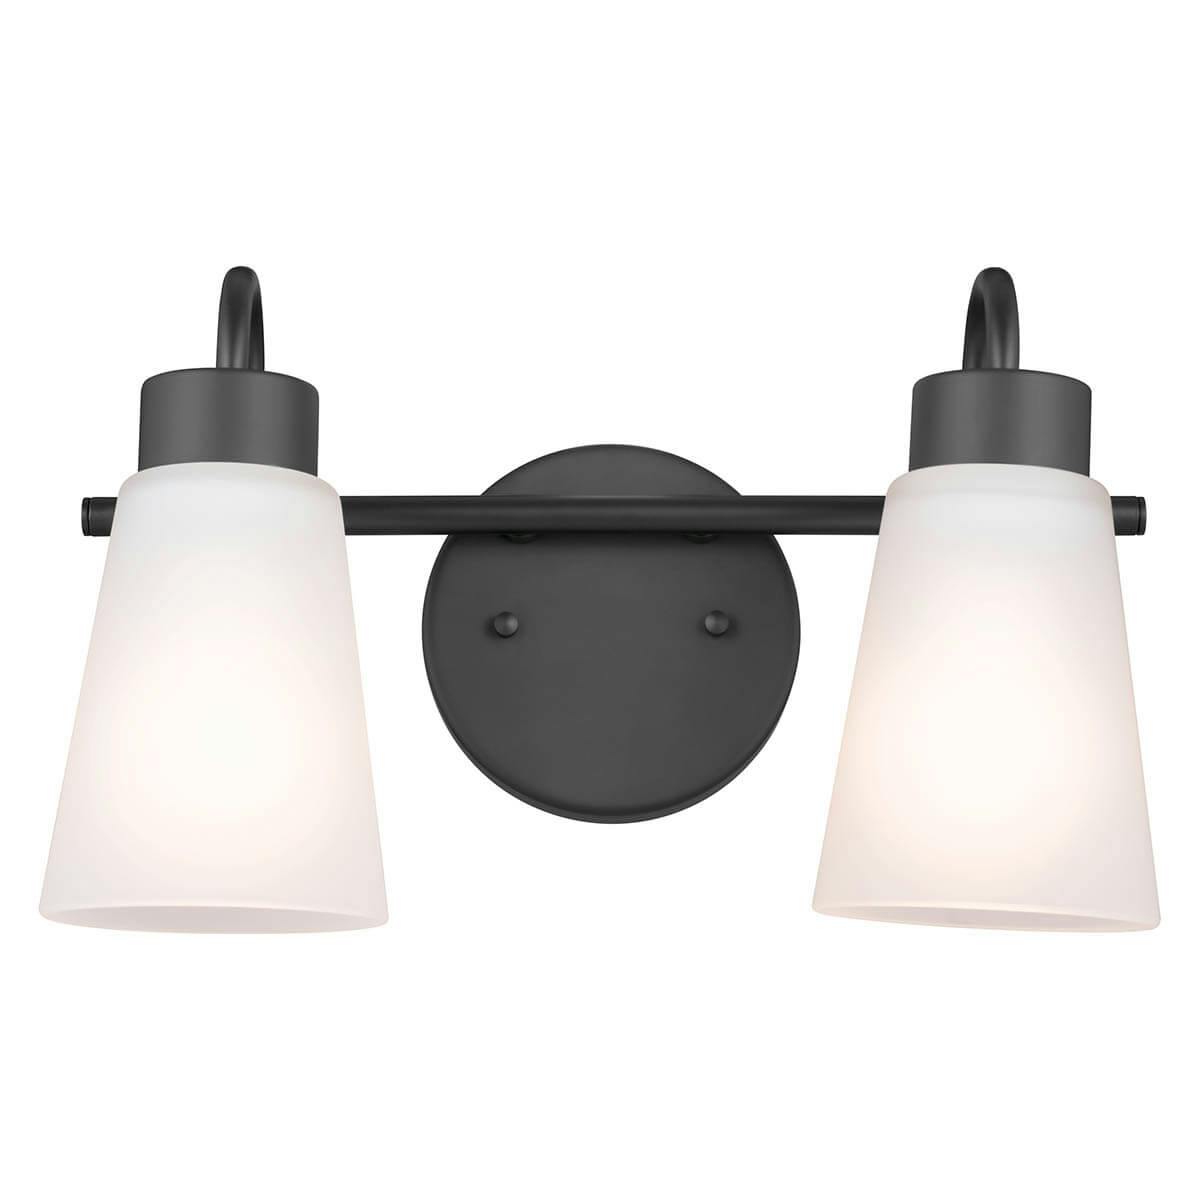 Front view of the Erma 14" 2 Light Vanity Light Black on a white background